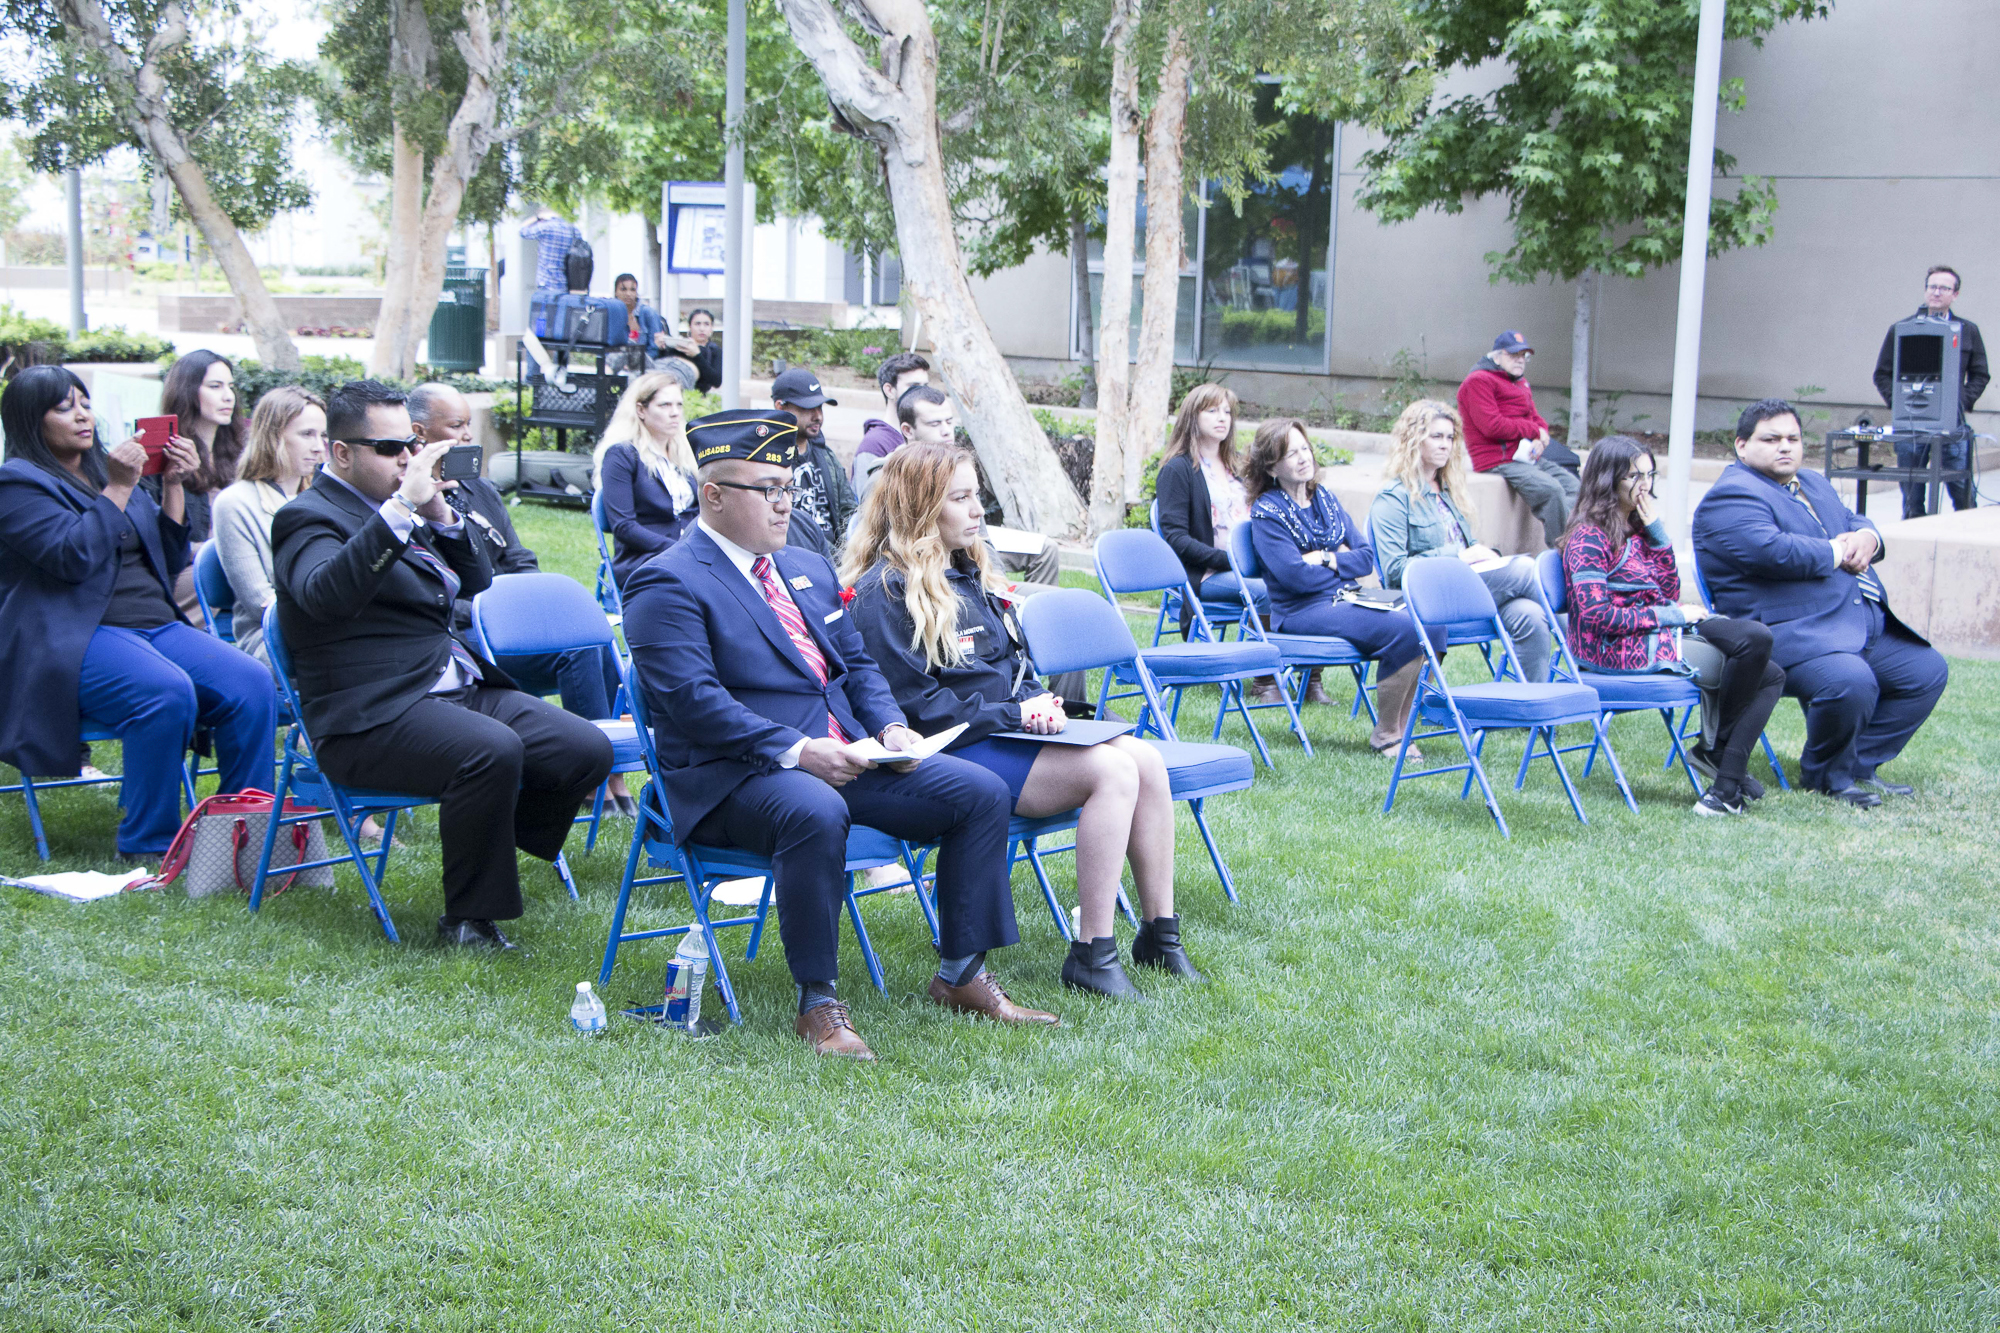  A small number of people attended Santa Monica College's Memorial Day Commemoration to the disappointment of several of those who spoke at the event on Thursday, May 25, 2018 in Santa Monica, California (Wilson Gomez/Corsair Photo) 